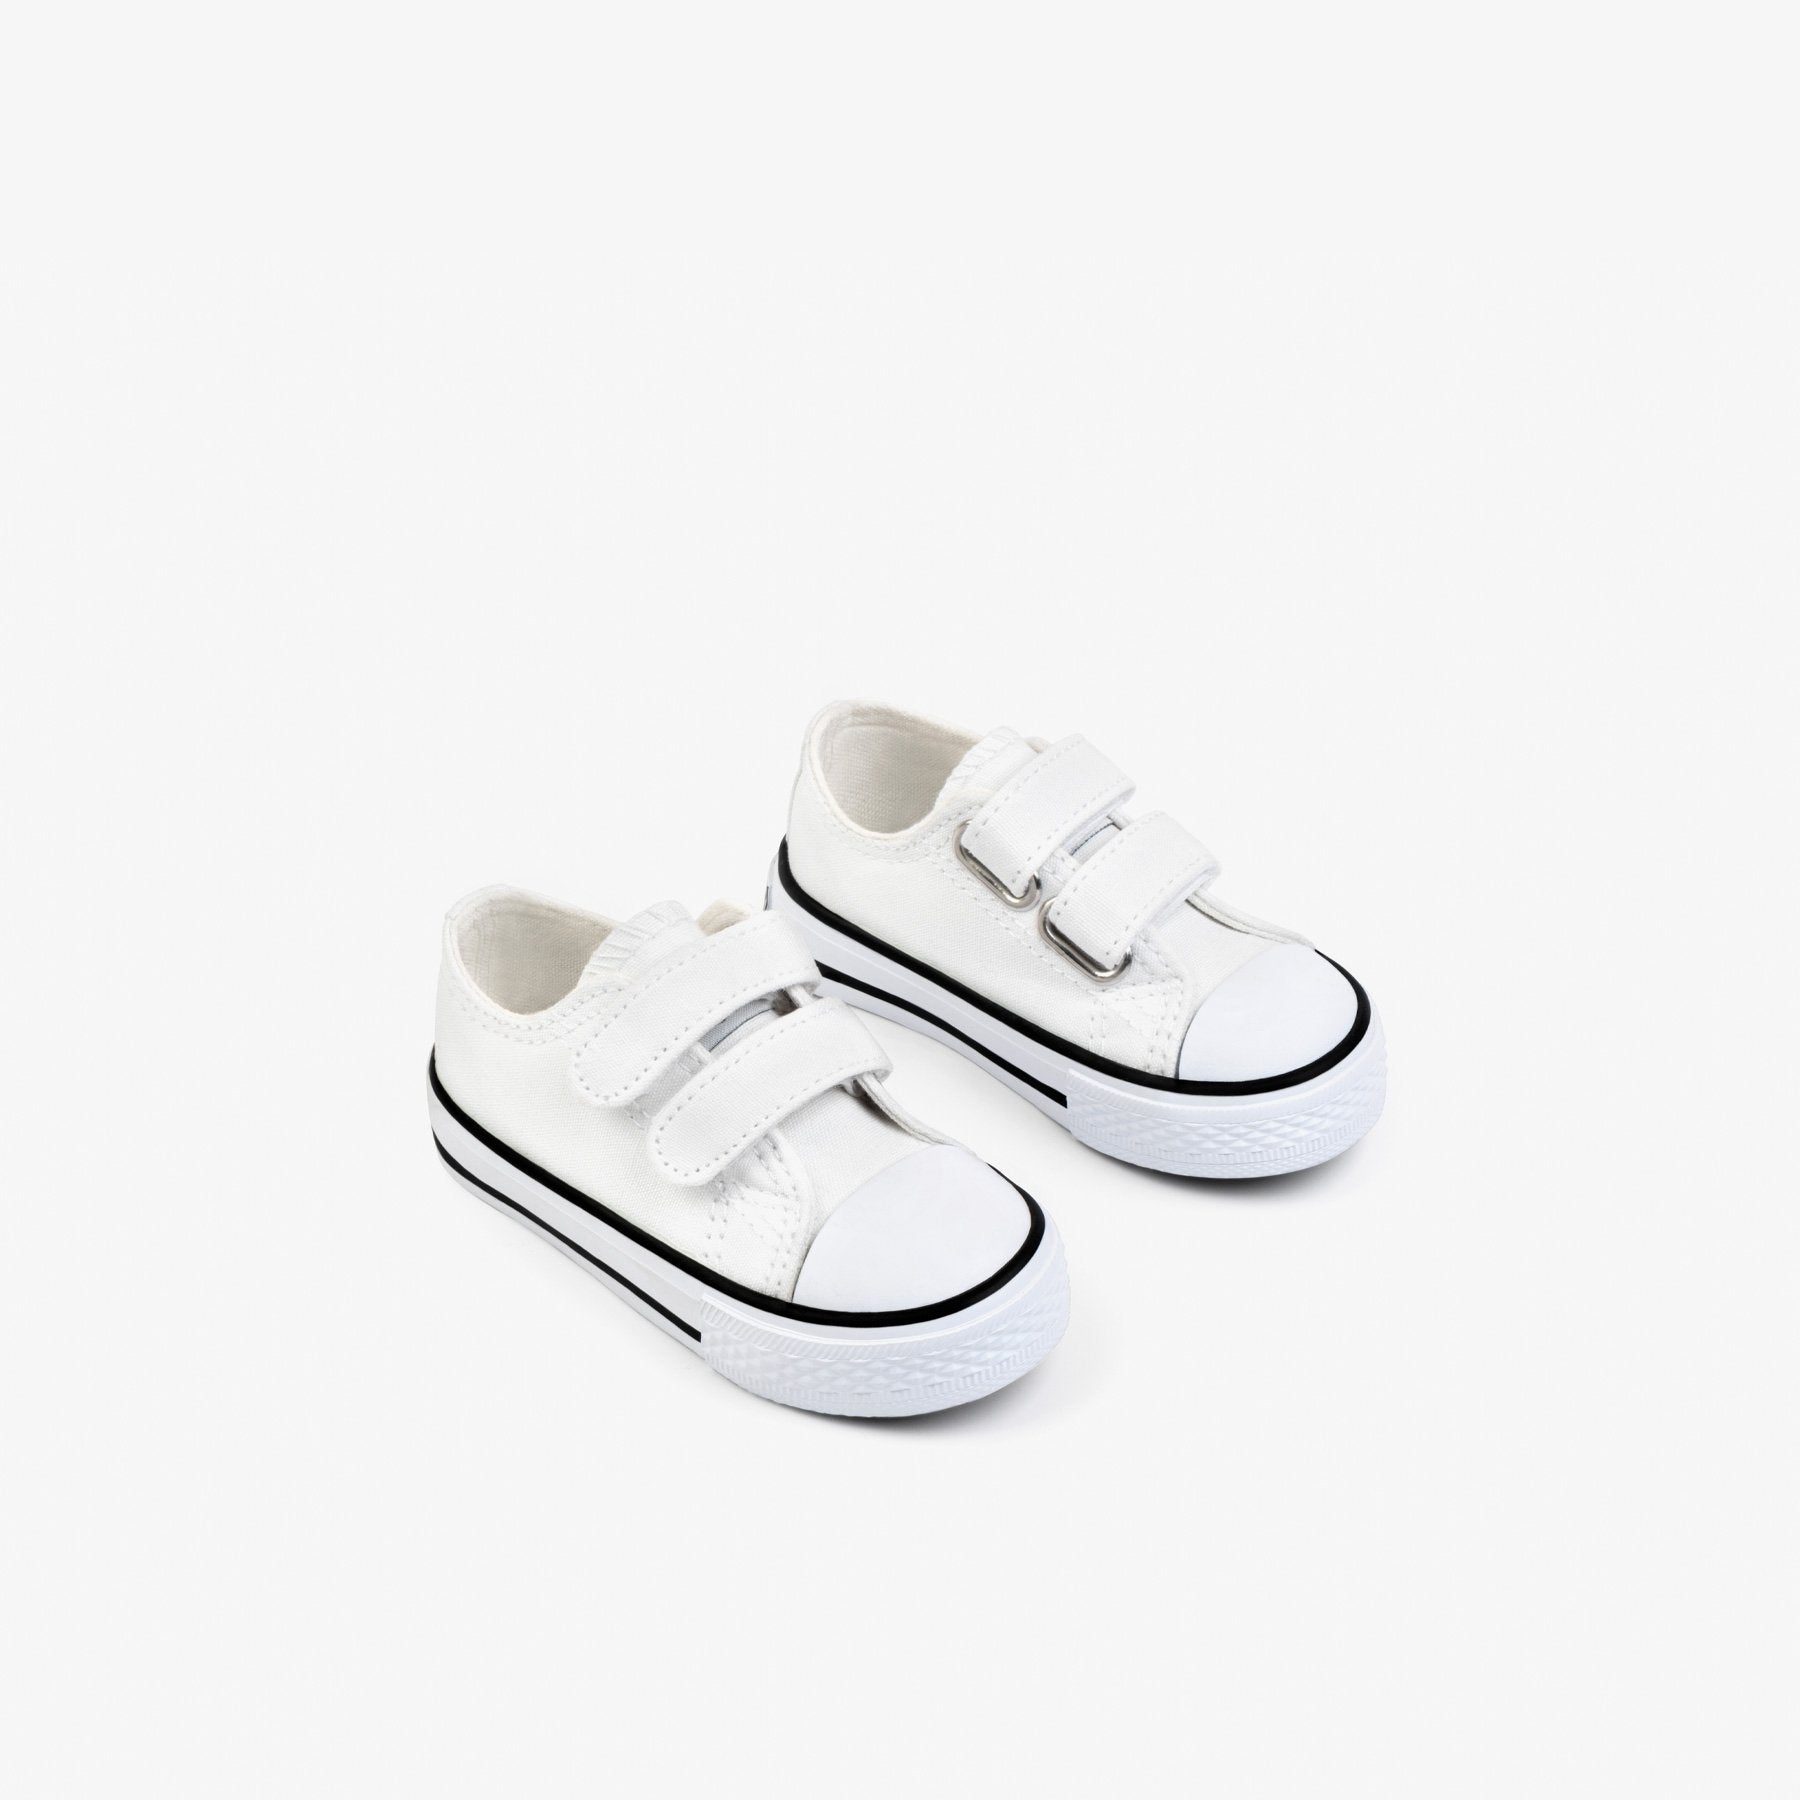 OSITO Shoes Baby's White Canvas Sneakers